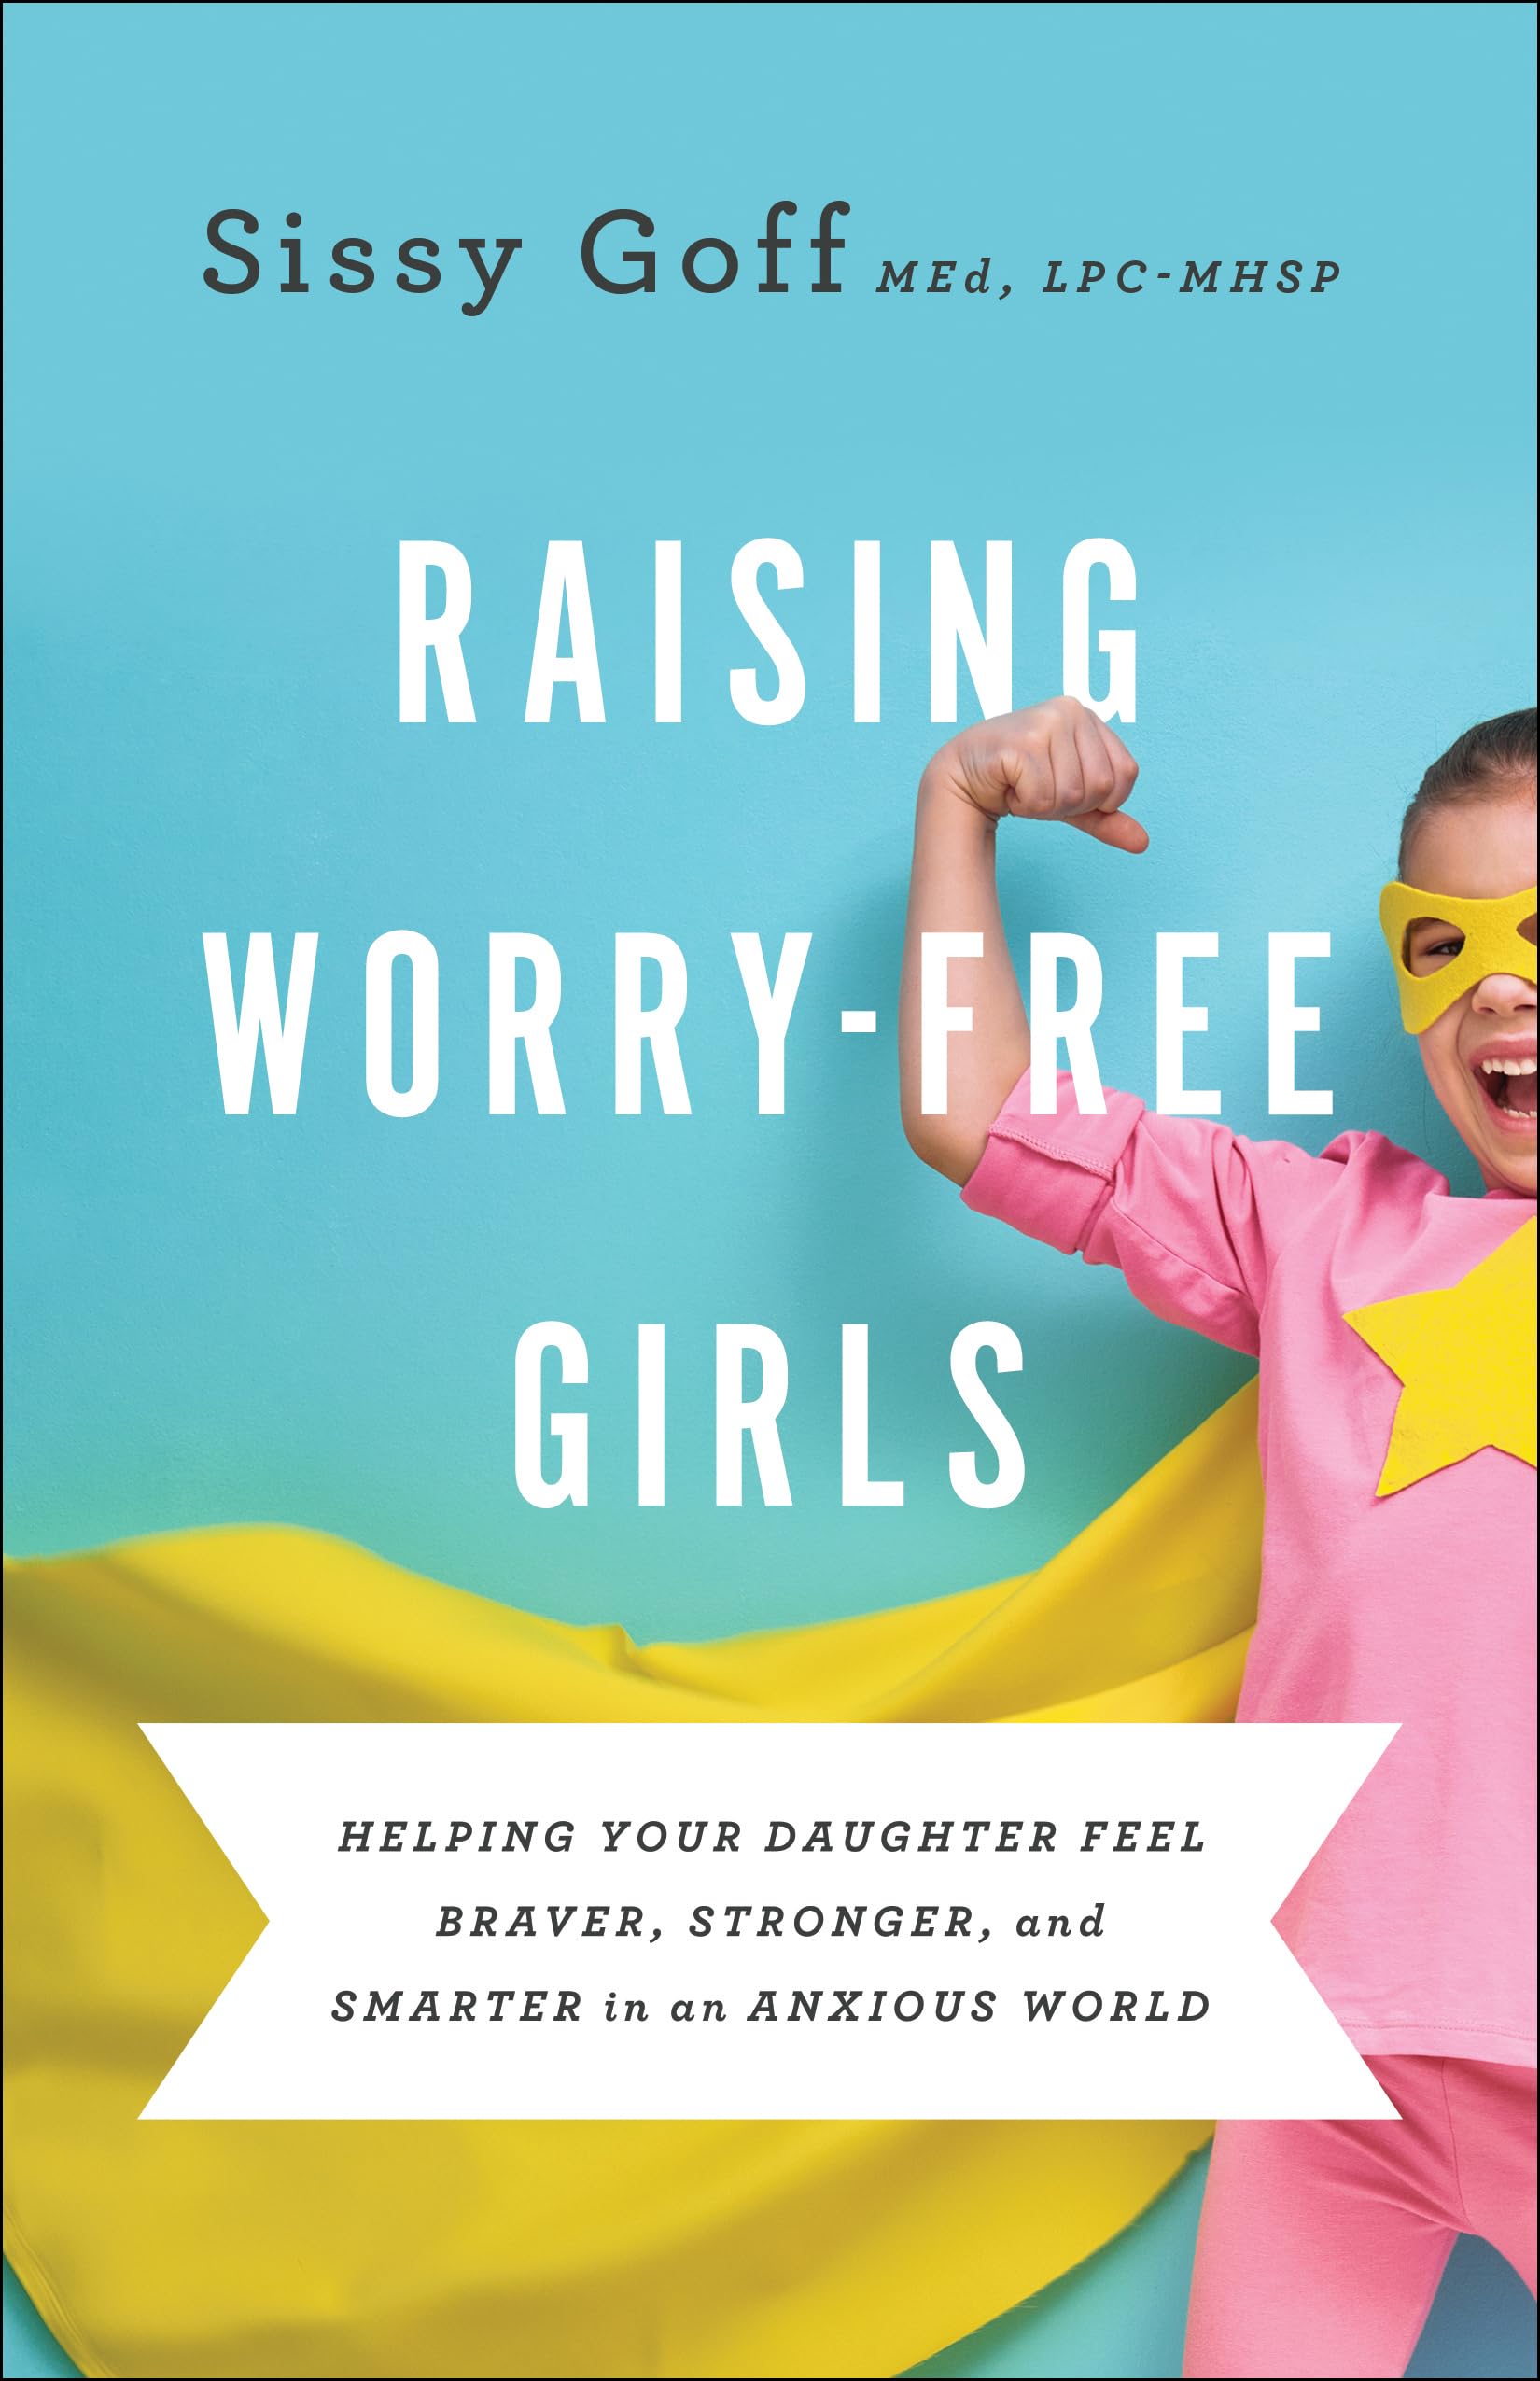 Raising Worry-Free Girls: Helping Your Daughter Feel Braver, Stronger, and Smarter in an Anxious World by Goff, Sissy, Lpc-Mhsp